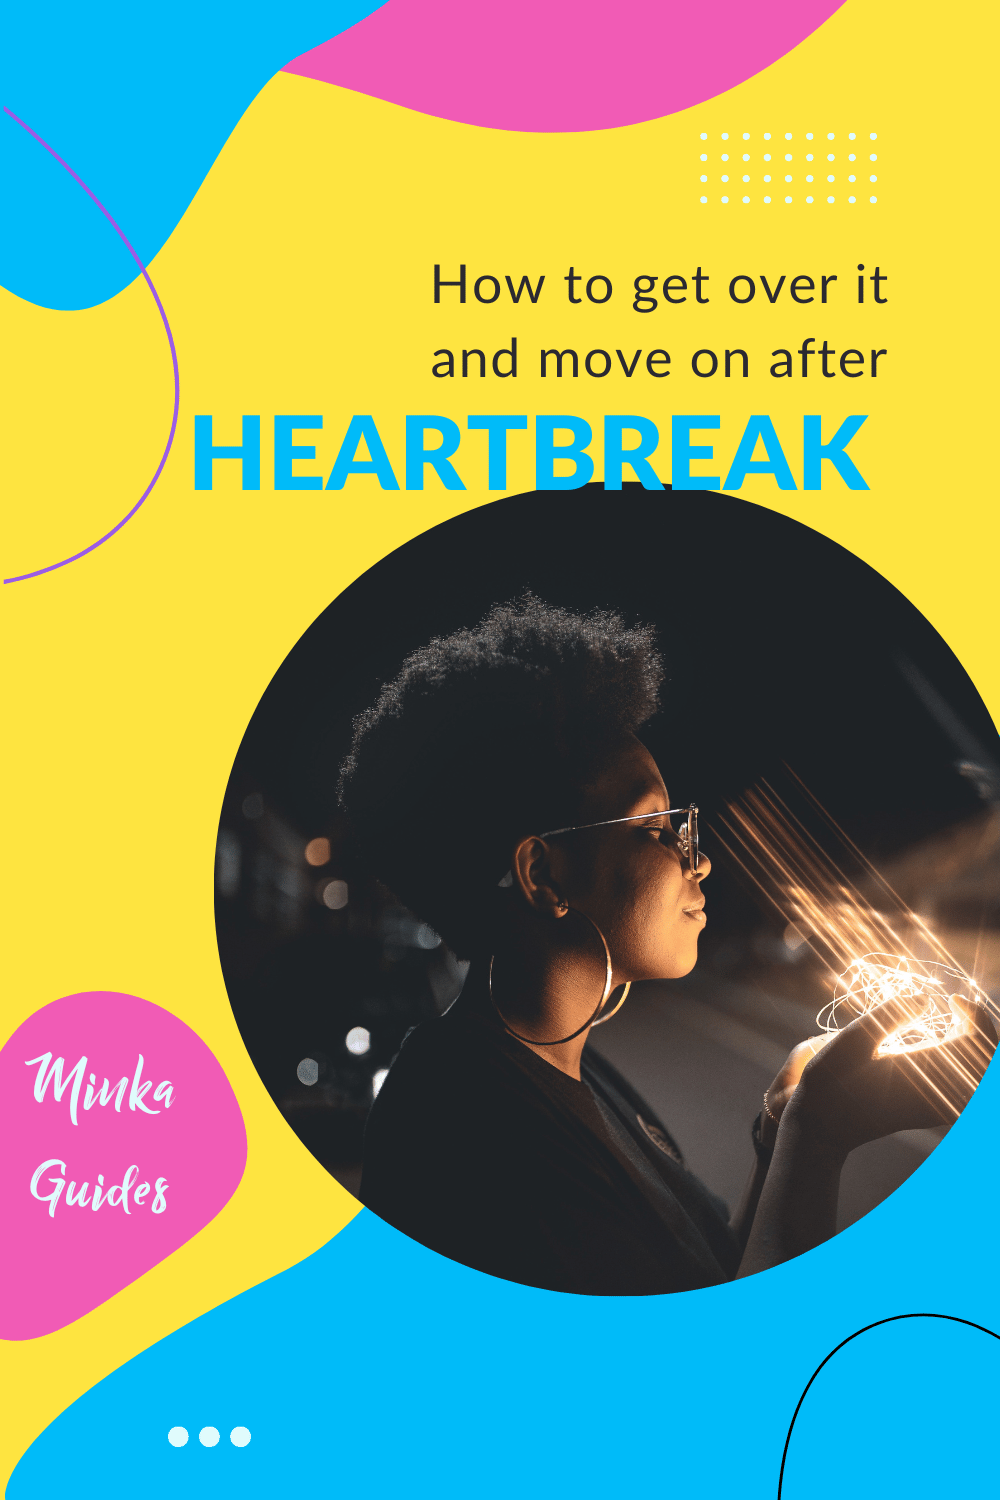 How to get over heartbreak | Minka Guides